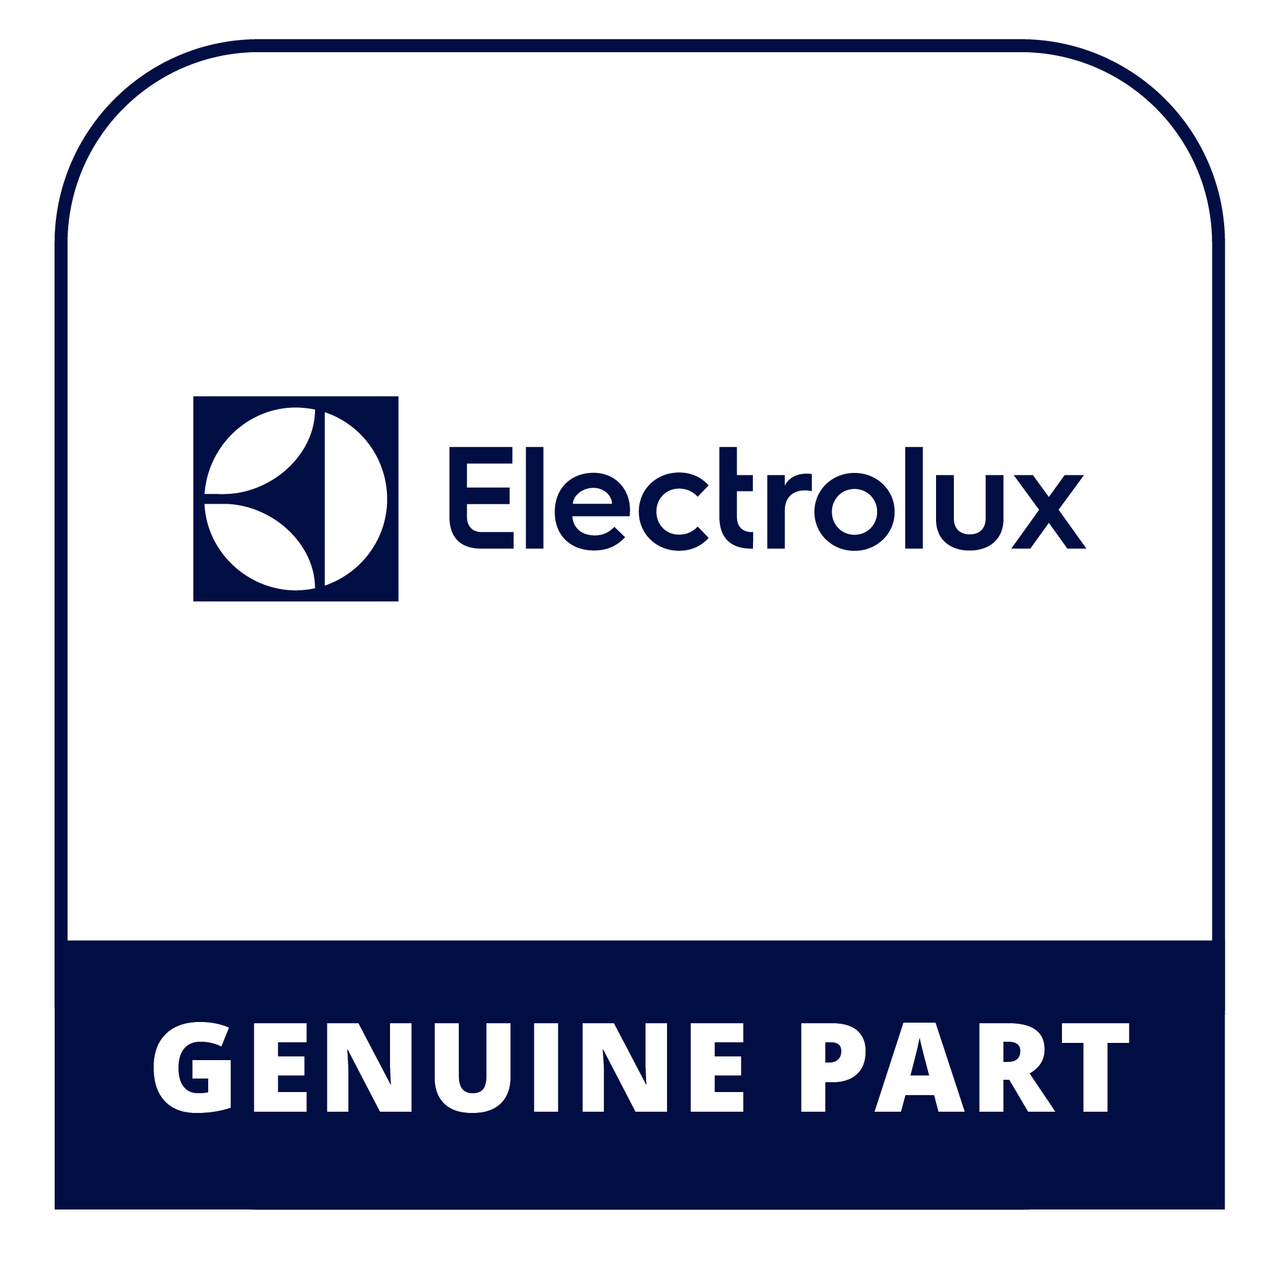 Frigidaire - Electrolux 316462435 Owners Manual - Genuine Electrolux Part